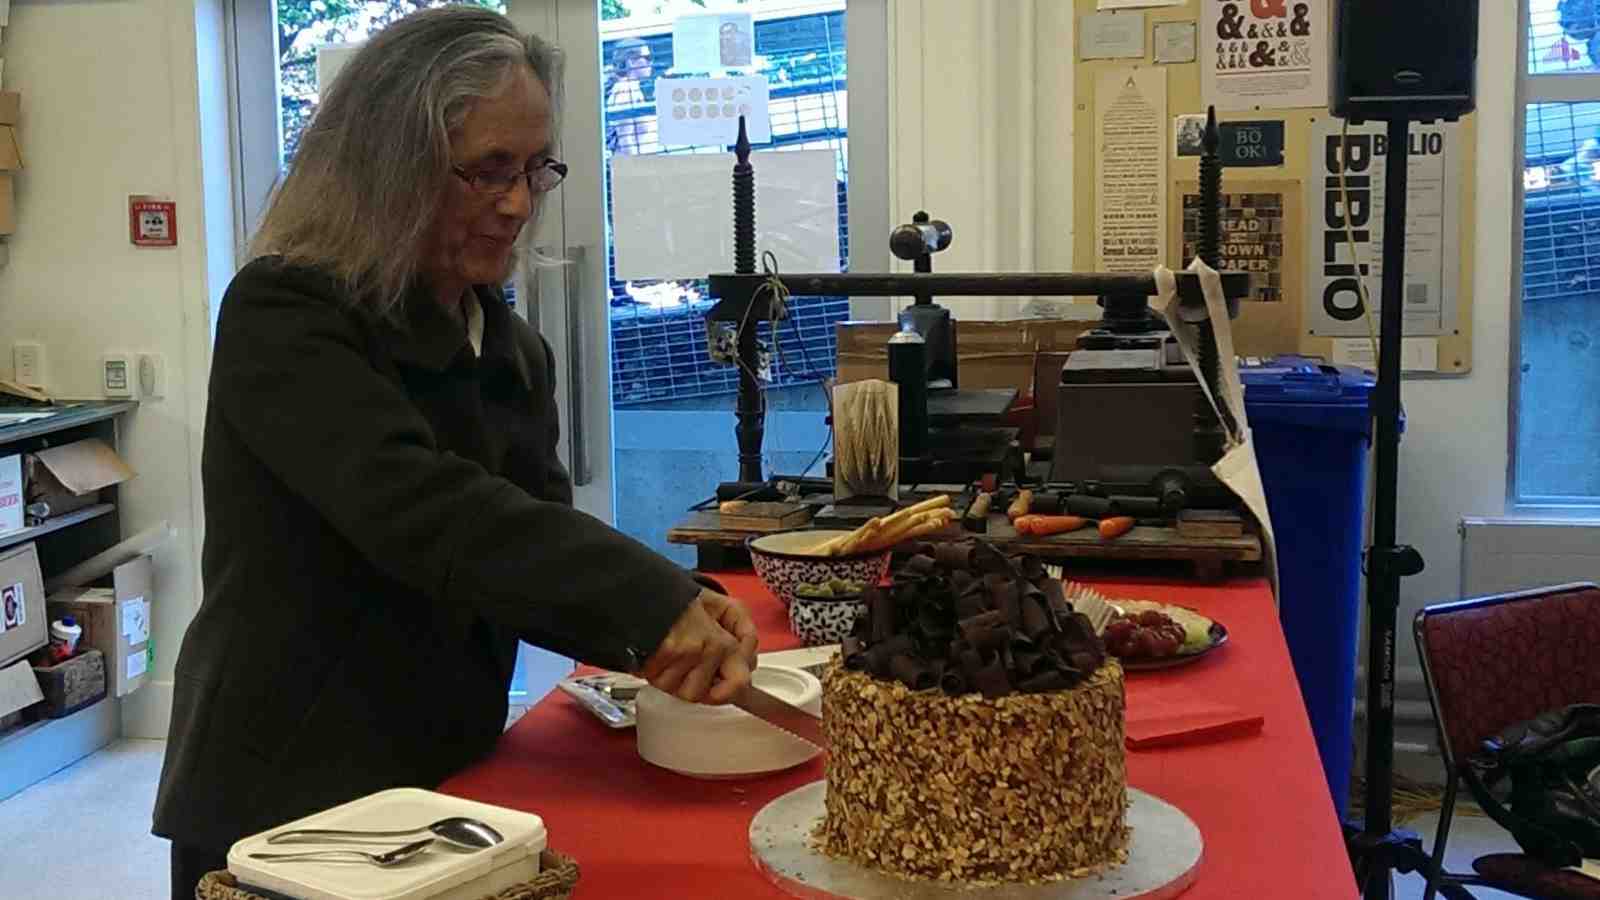 Author Patricia Grace cuts a very elaborate birthday cake topped with chocolate curls – at Wai-te-ata Press. Image credit: Meredith Paterson.